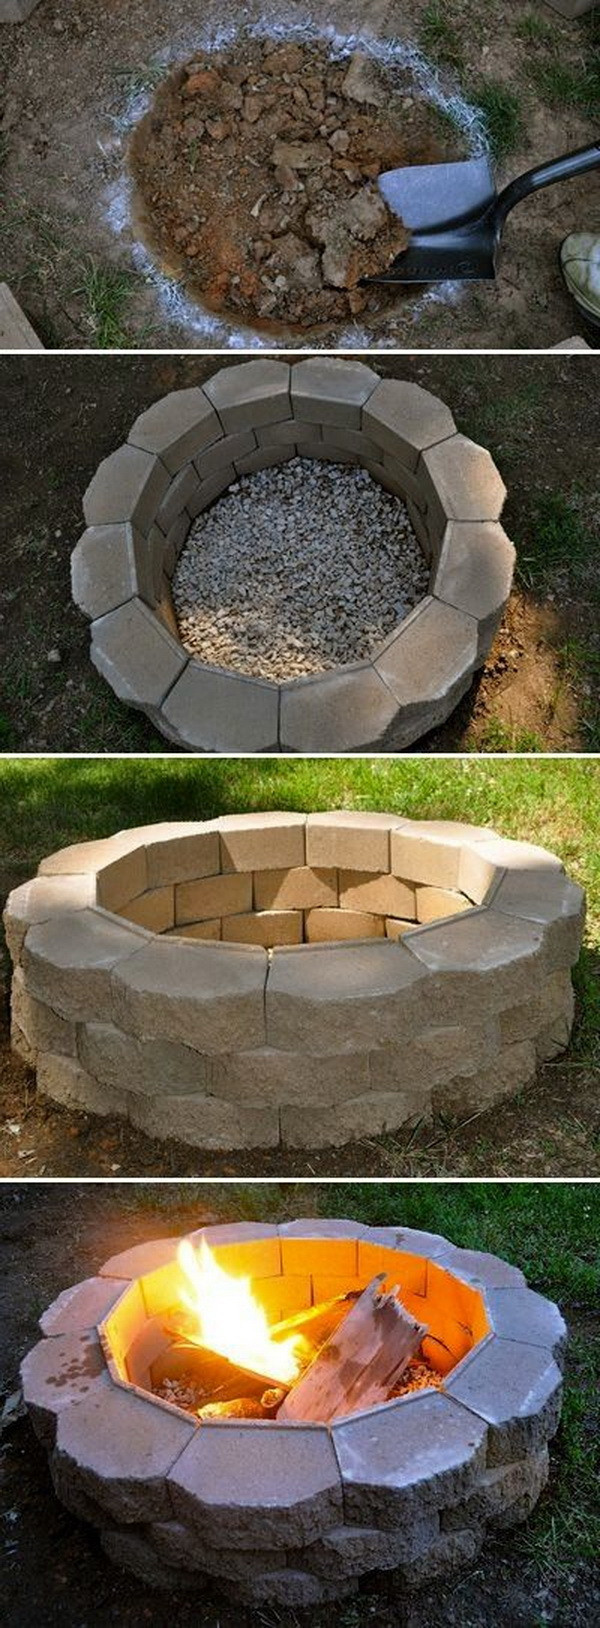 DIY Fire Pits Outdoor
 20 DIY Fire Pits for Your Backyard with Tutorials